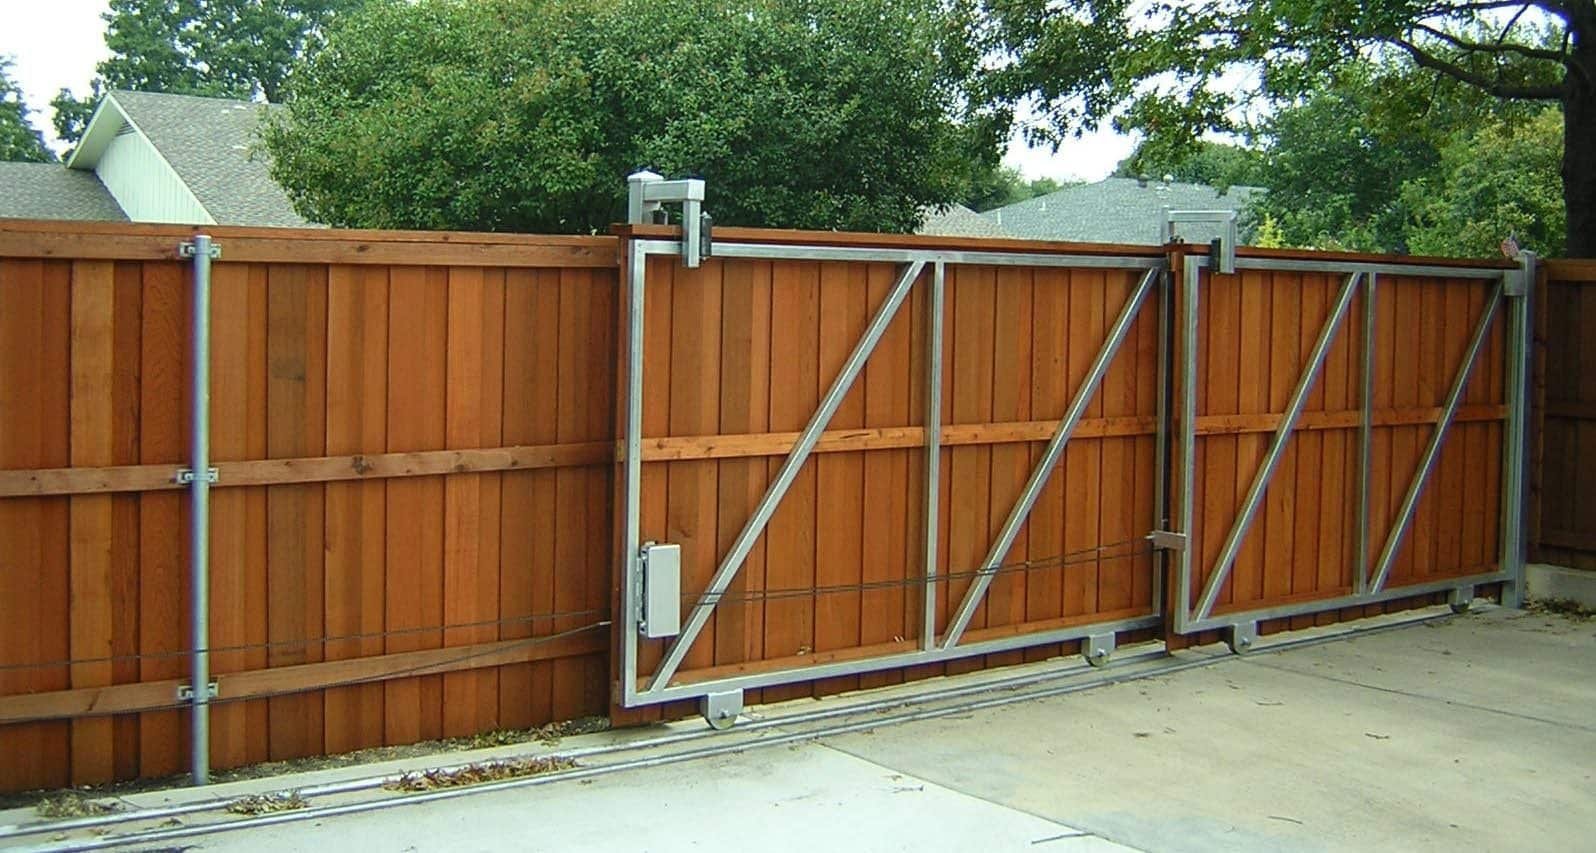 Importance of Metal Privacy as a Home decorative